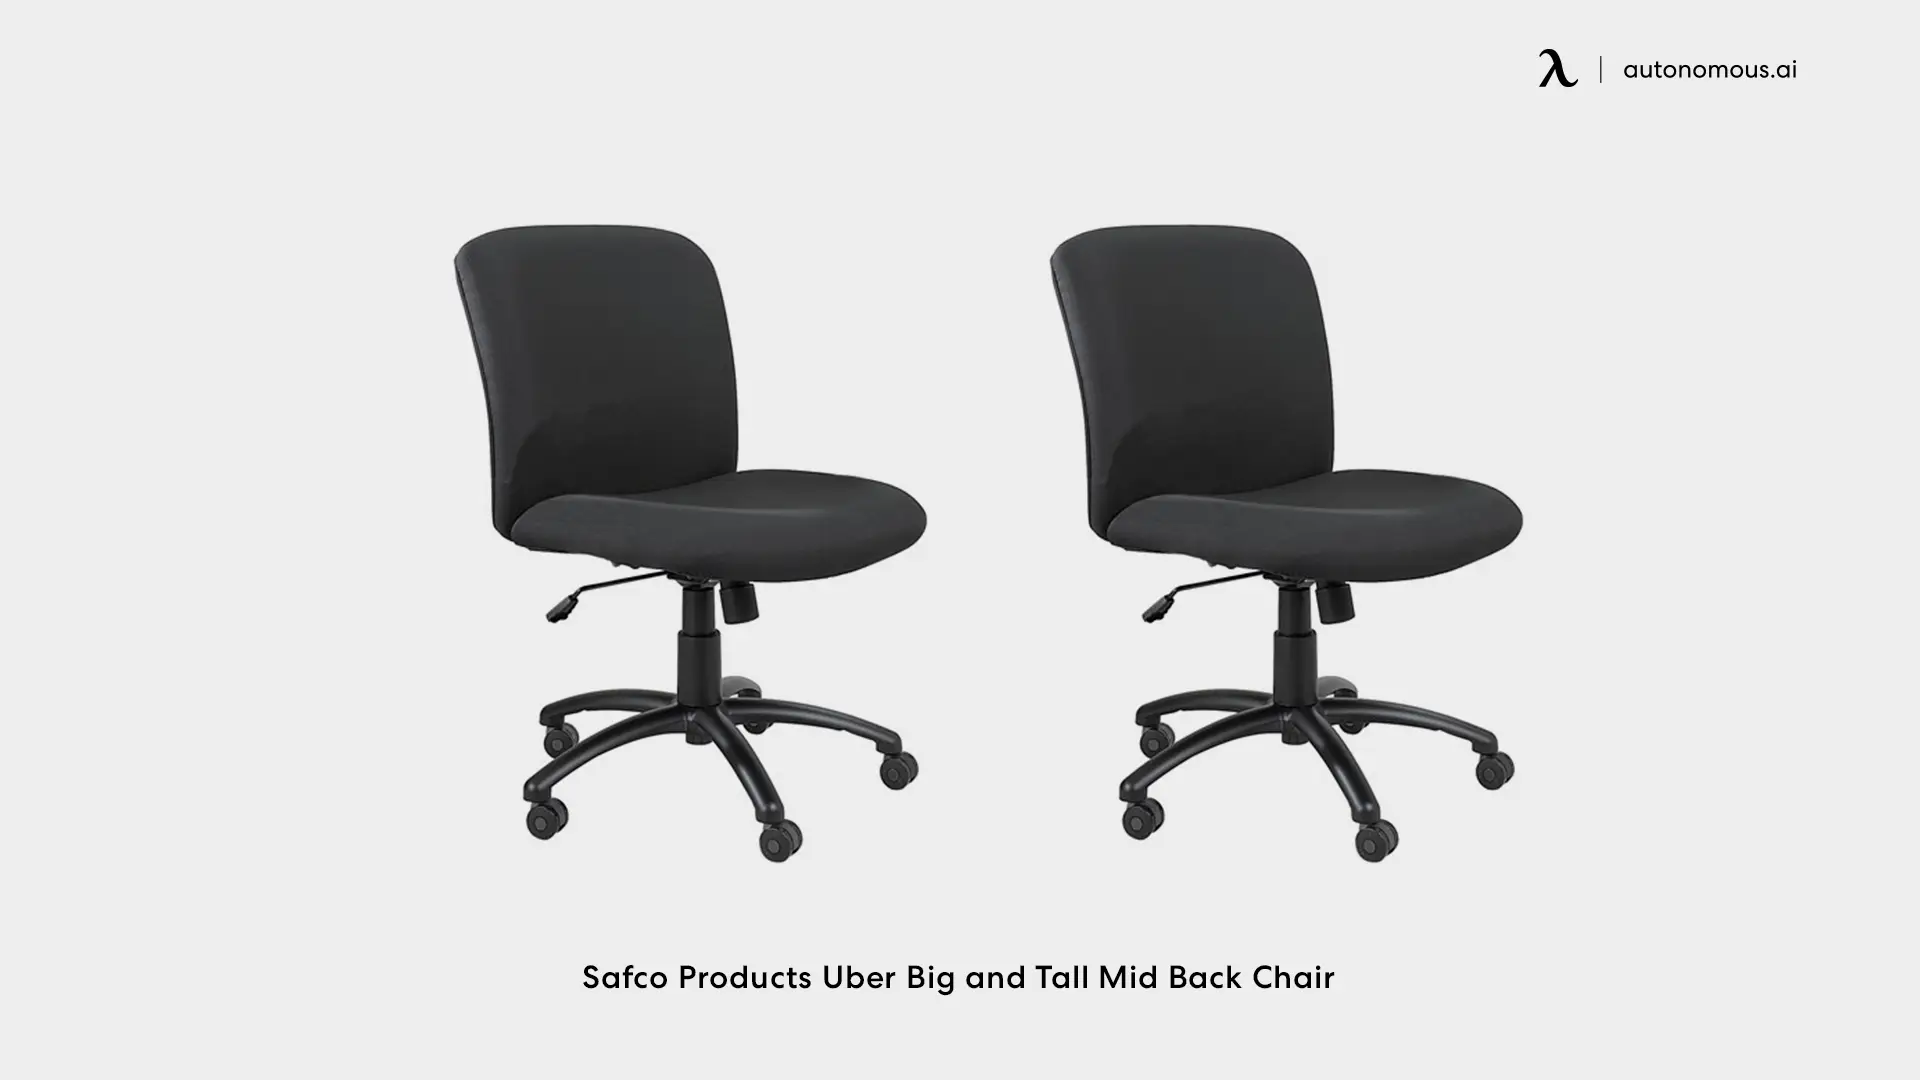 Safco Products Uber Big and Tall Mid Back Chair